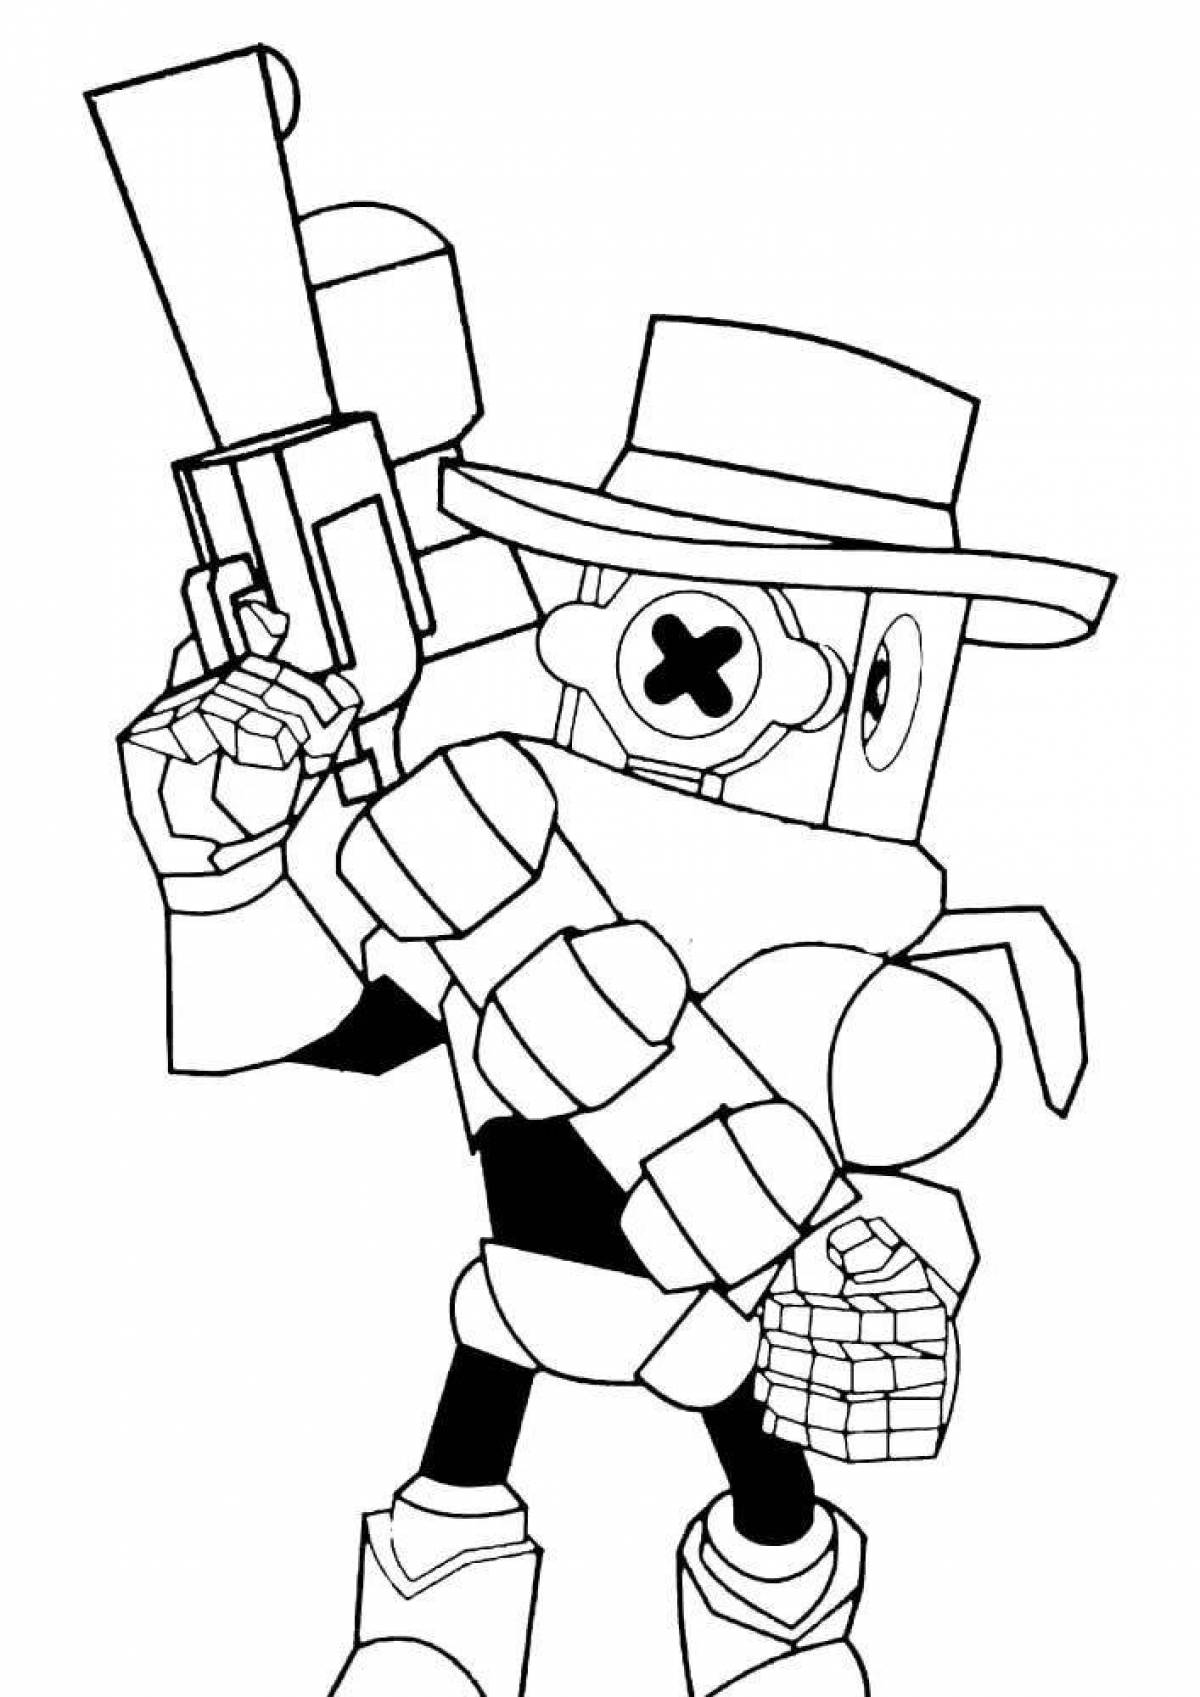 Ash's amazing coloring page from bravo stars